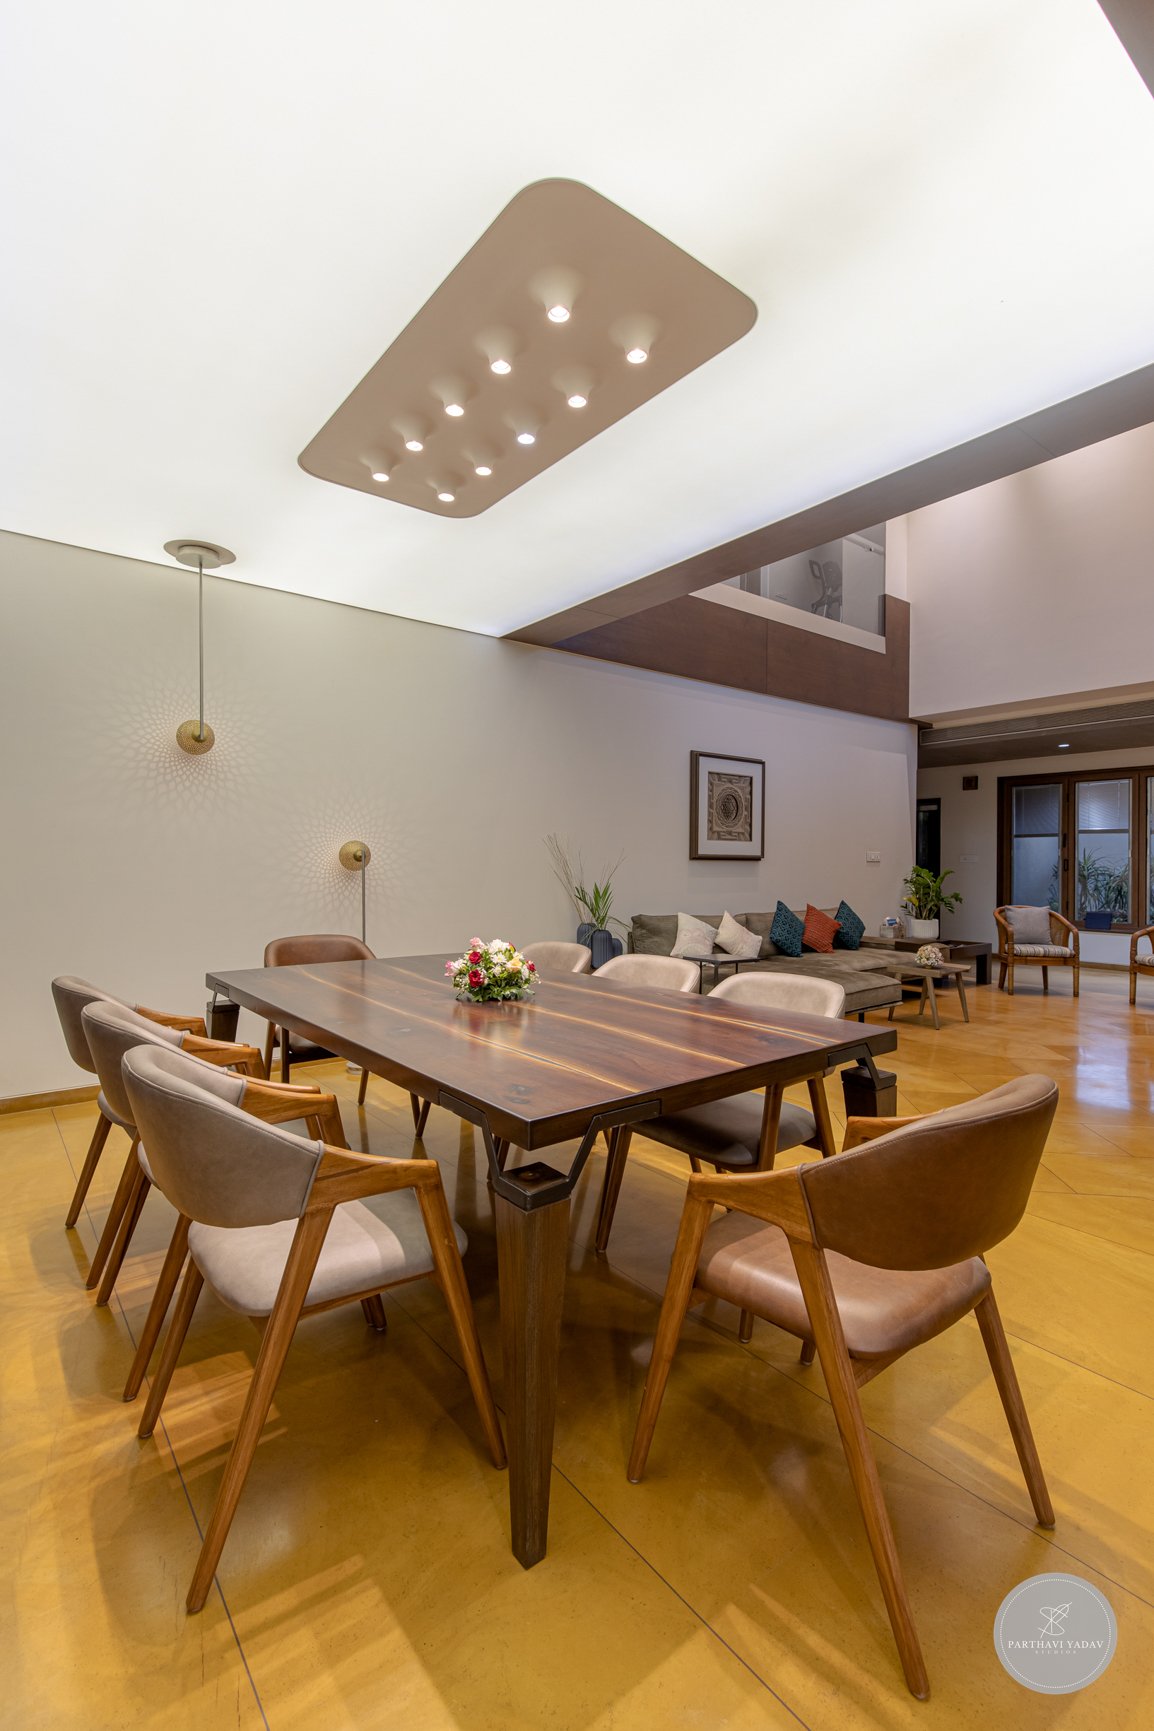 best interior photographer in pune bangalore - custom eight person dining table with the light ceiling and lamps.jpg